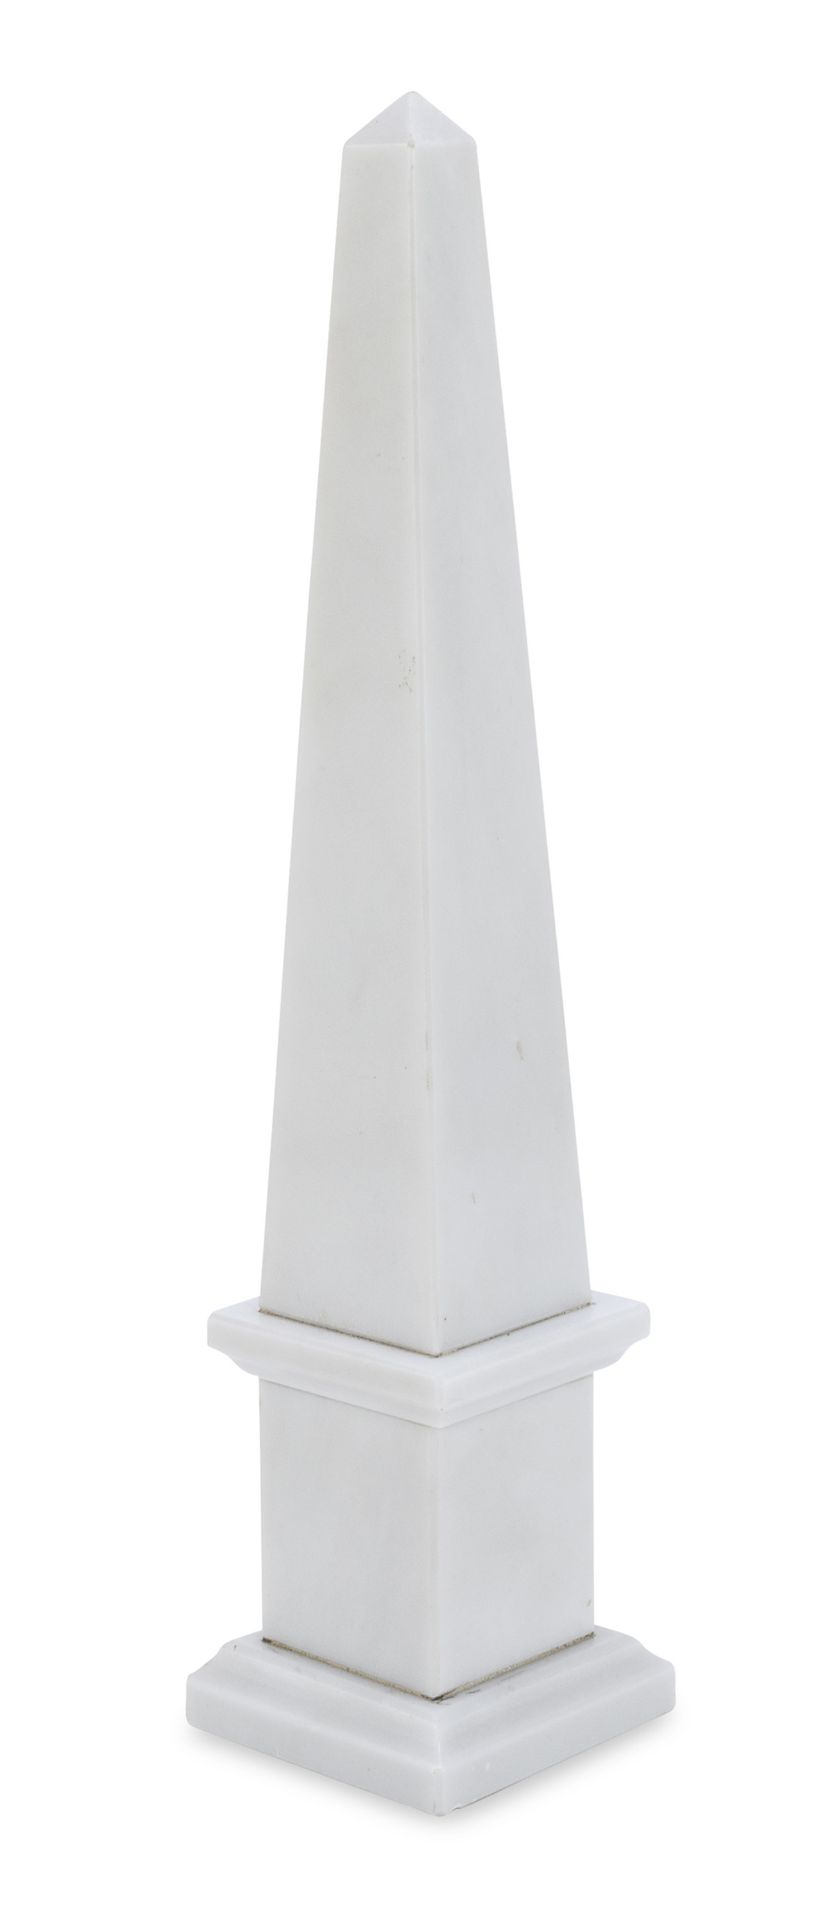 SMALL OBELISK IN WHITE MARBLE 20th CENTURY